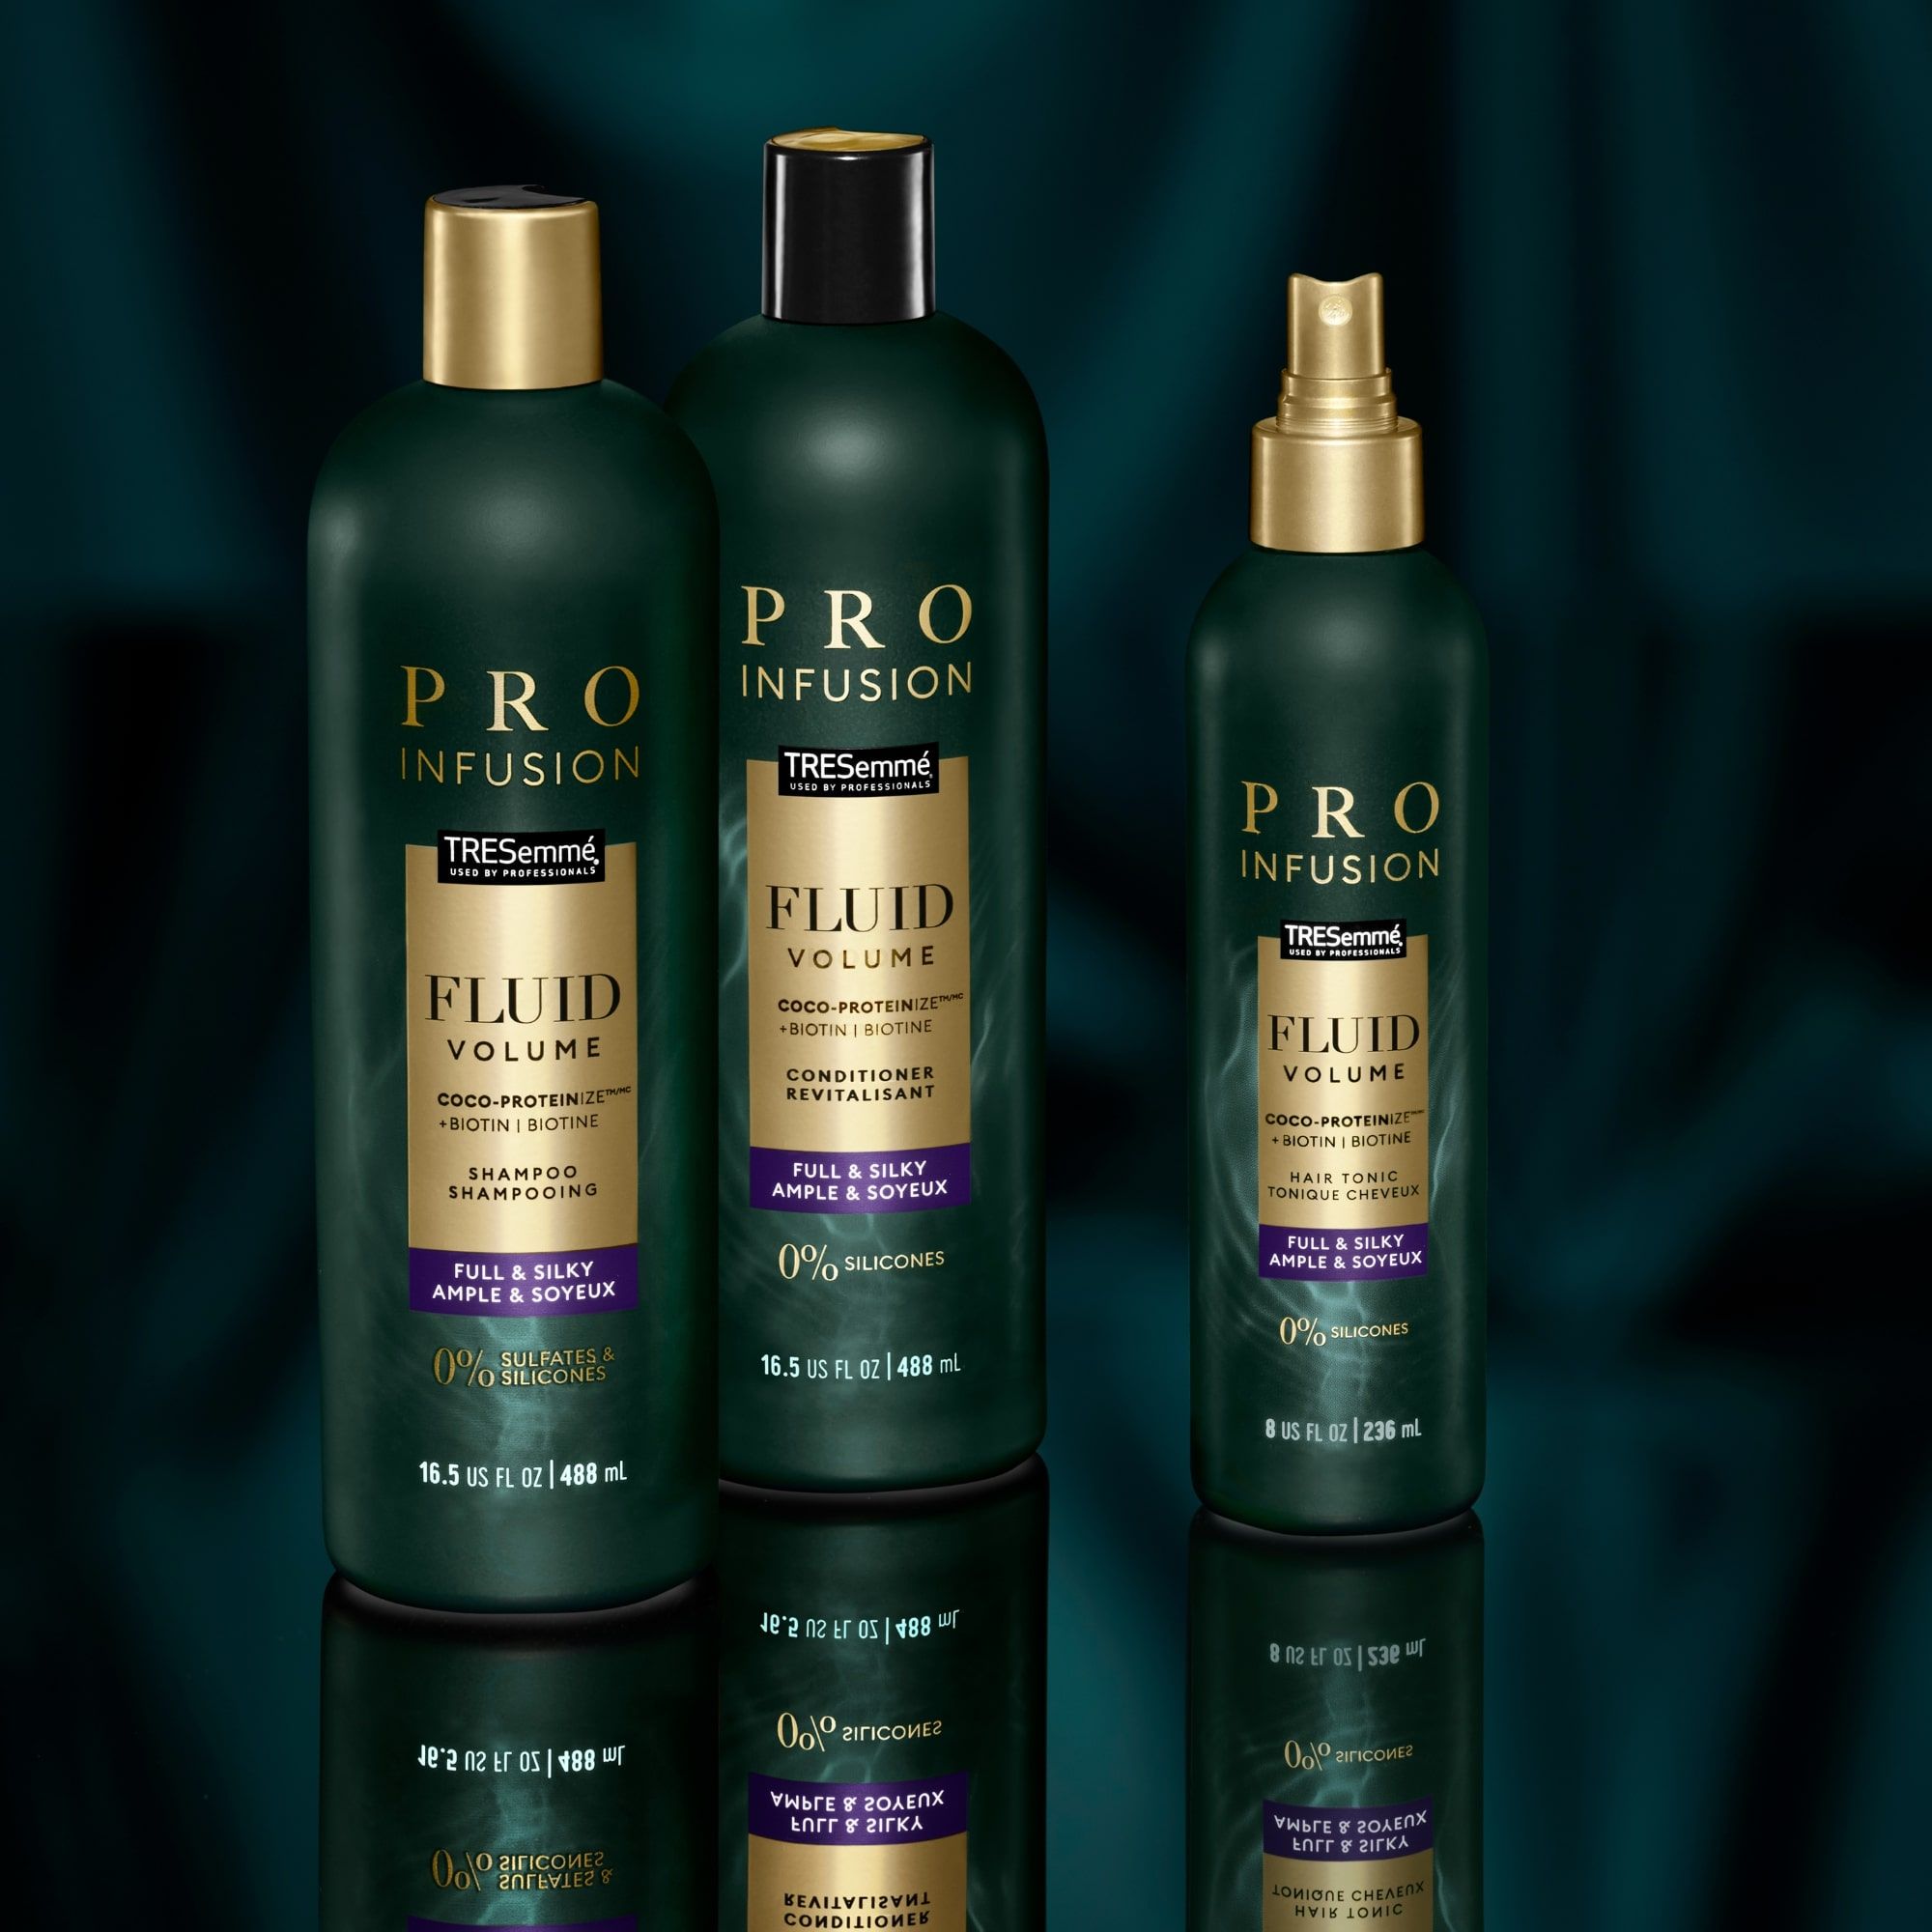 Pro Infusion Fluid Volume products